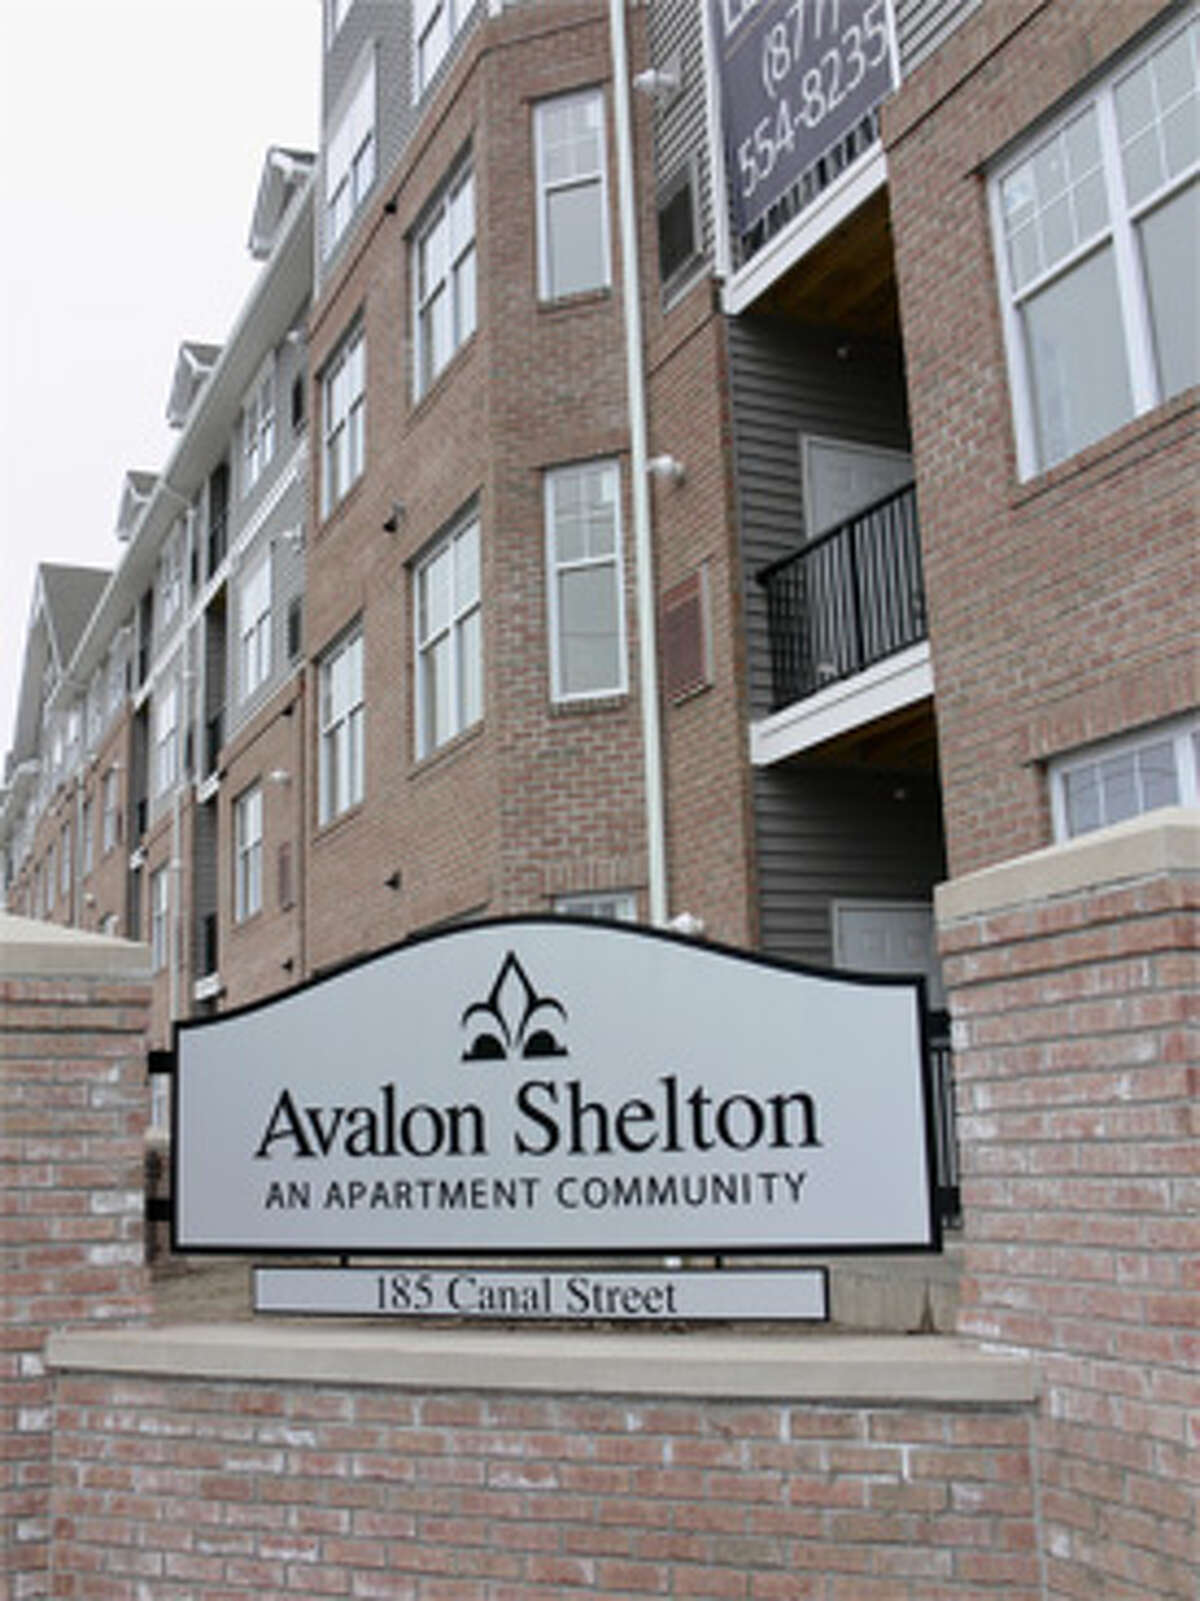 The Avalon Shelton rental complex on Canal Street.